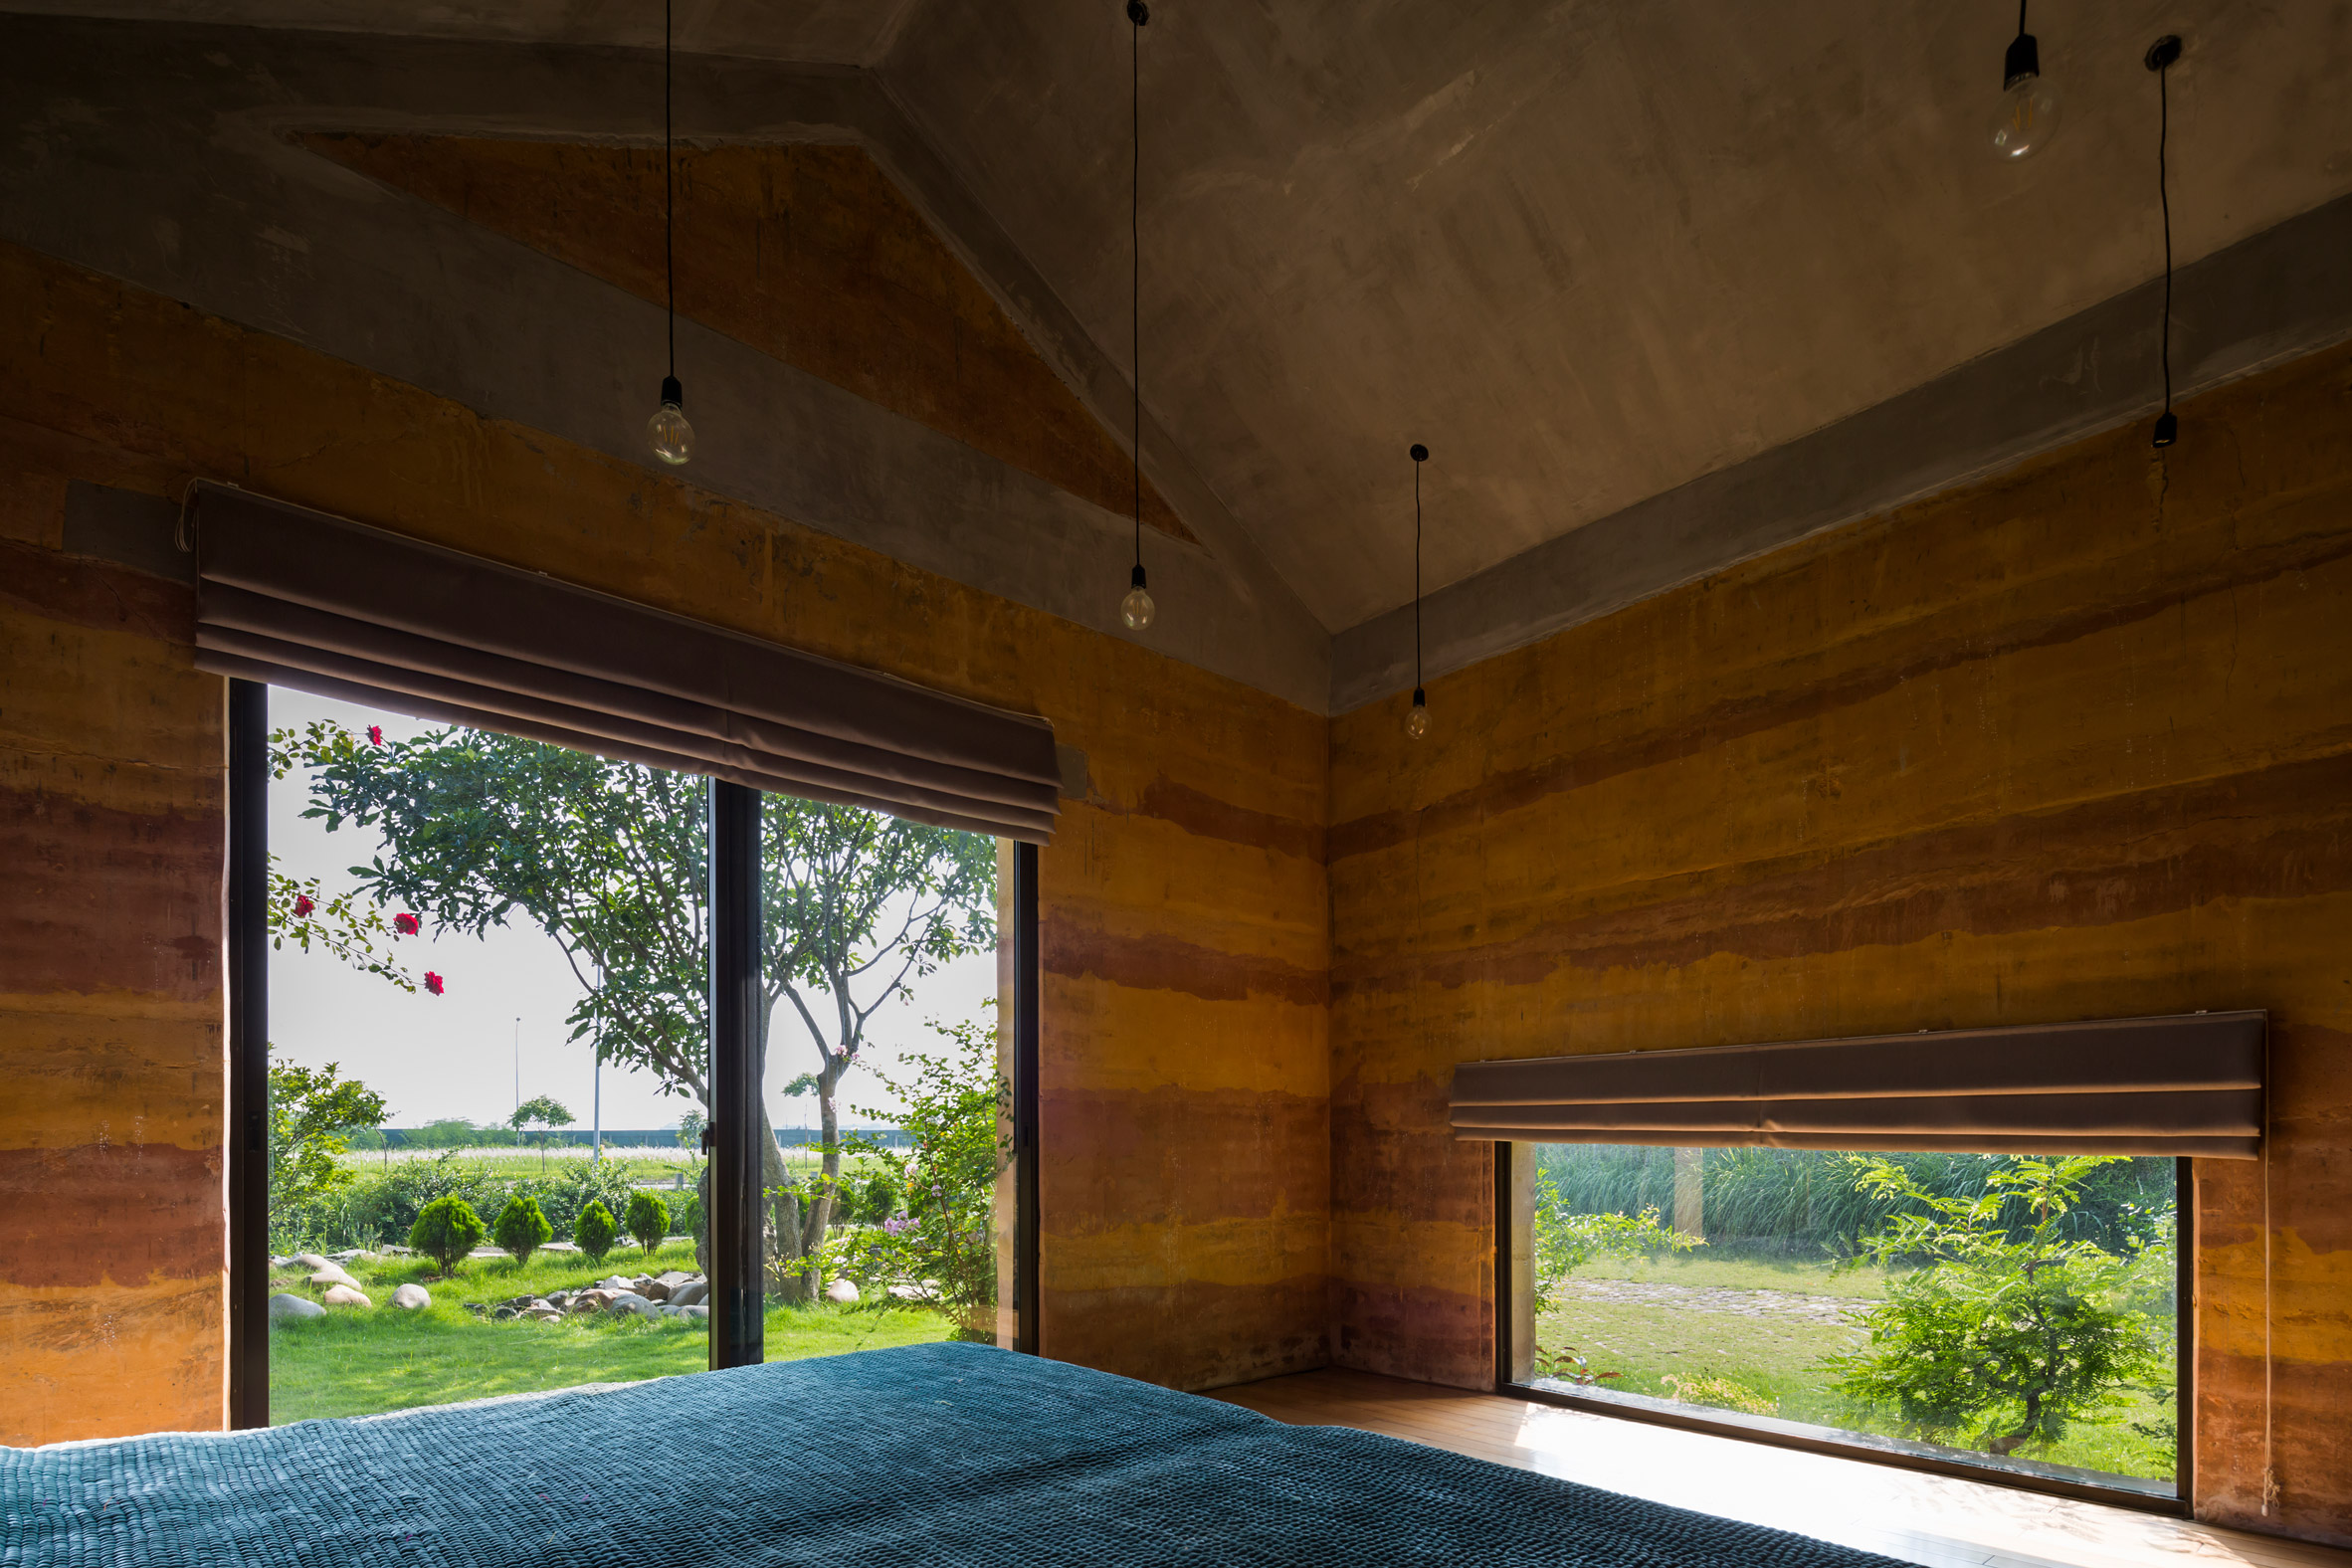 Dong Anh House by Vo Trong Nghia Architects